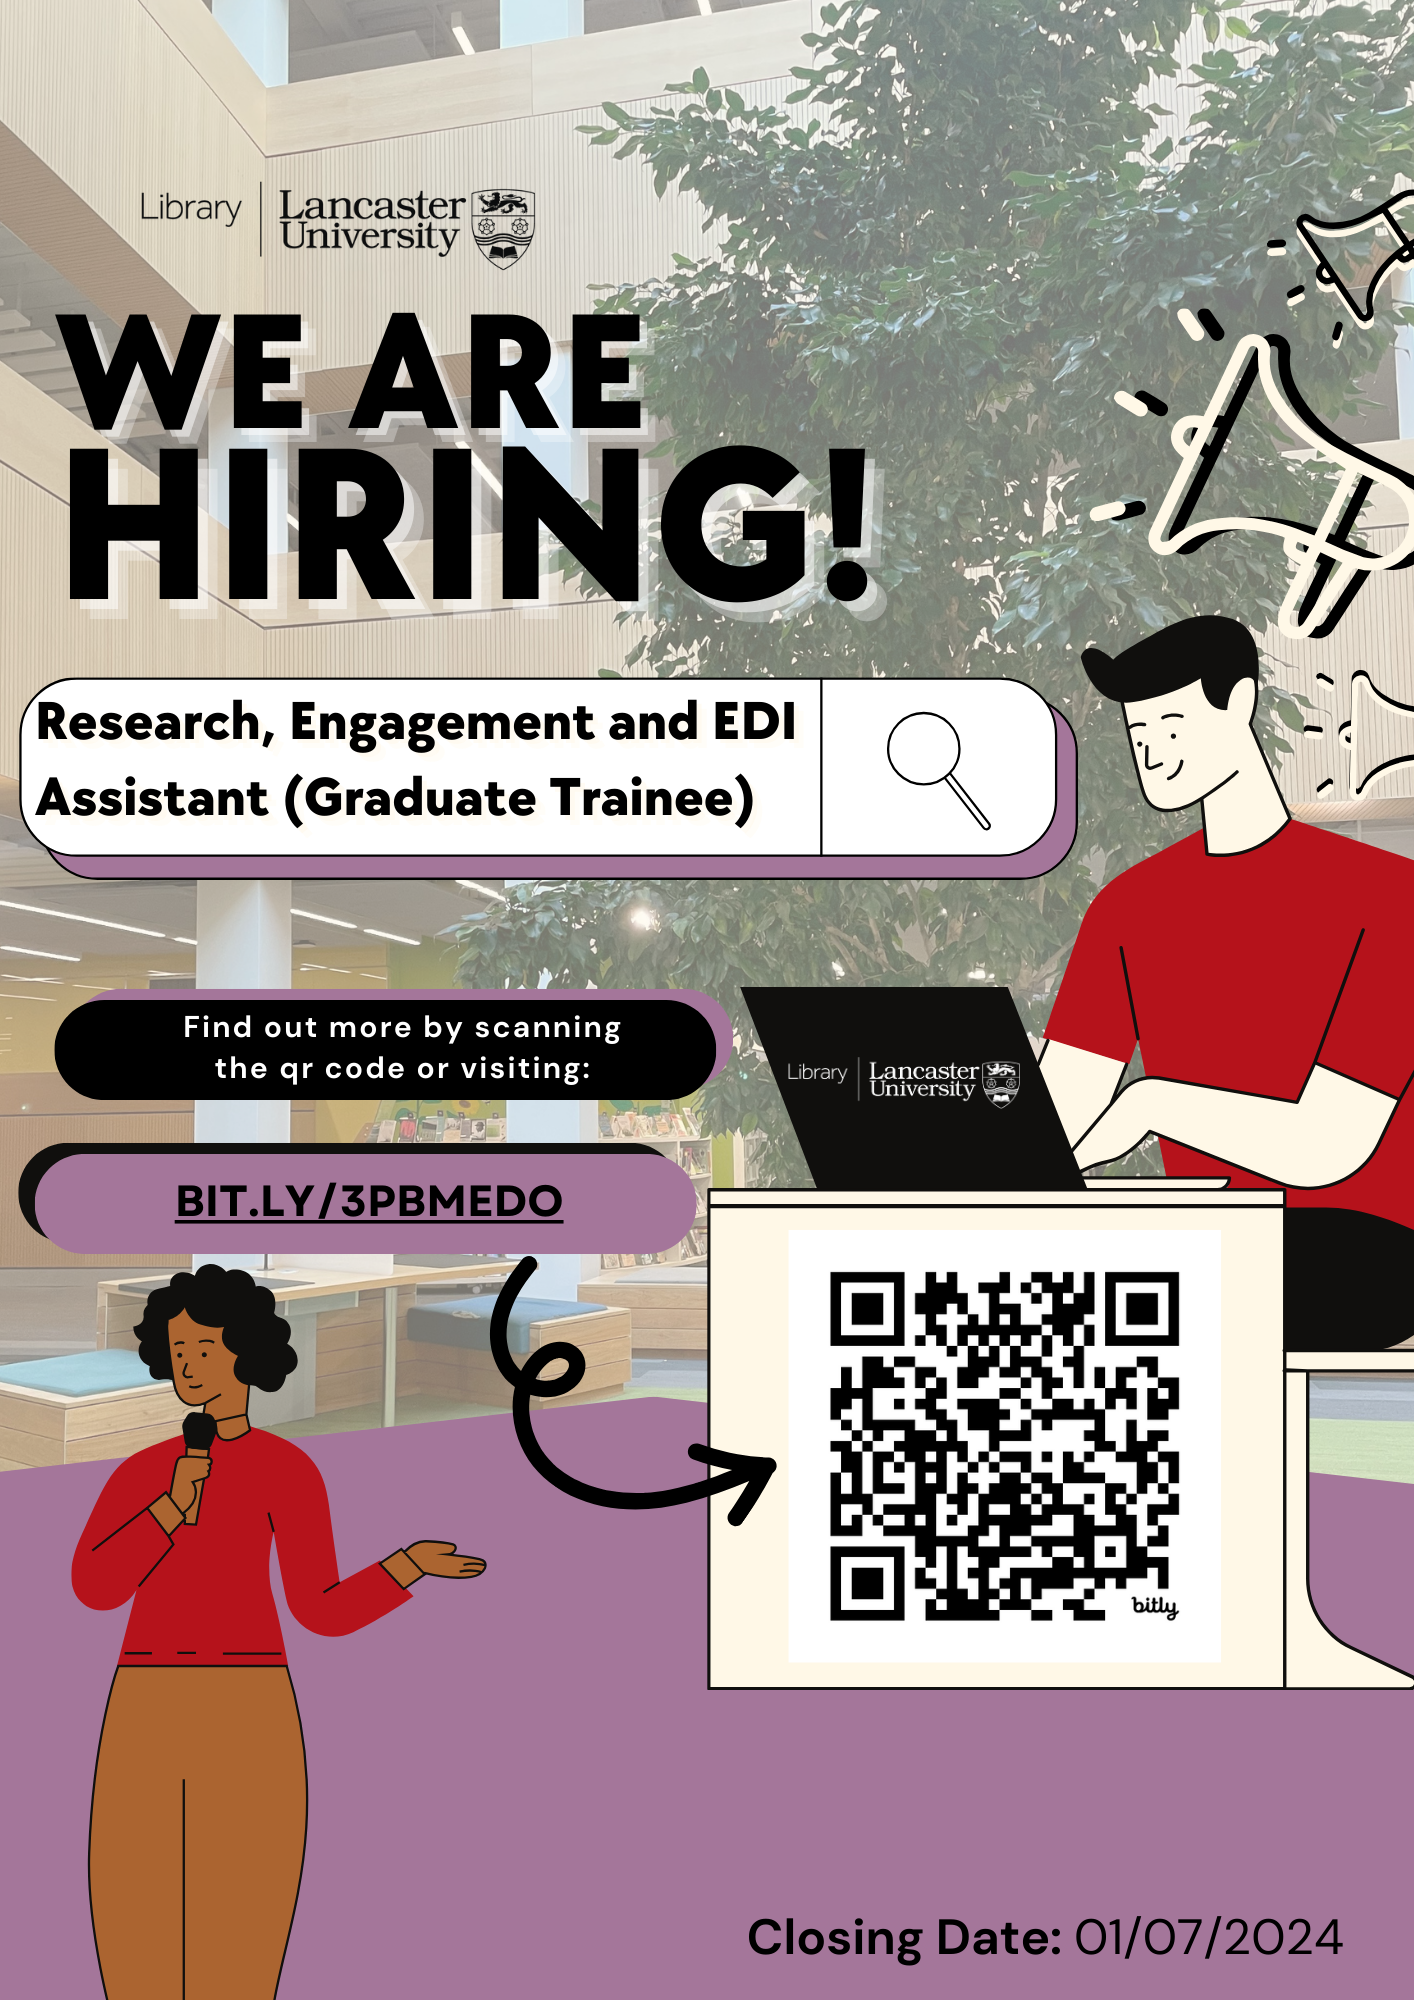 a poster for a job search